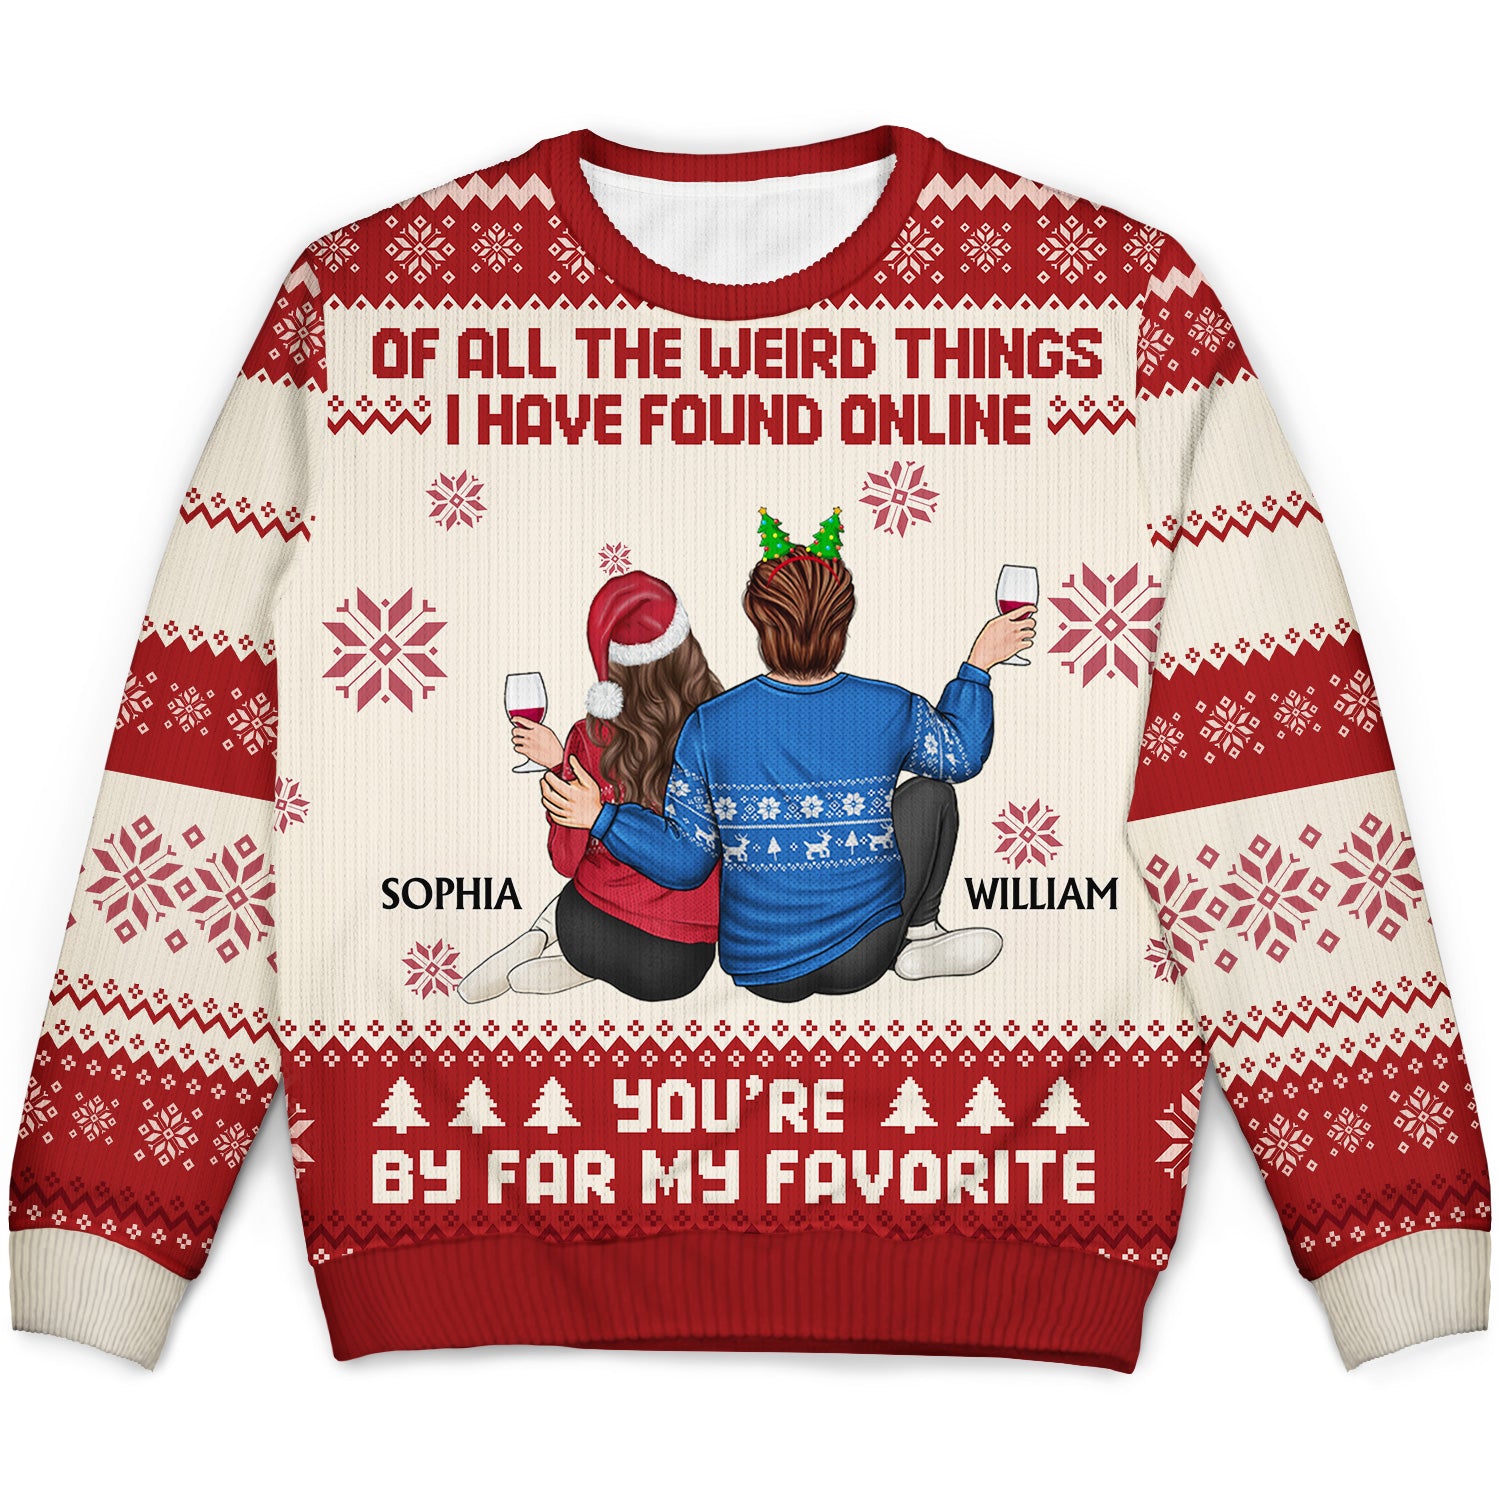 Of All The Weird Things - Christmas Gift For Couples, Husband, Wife - Personalized Unisex Ugly Sweater